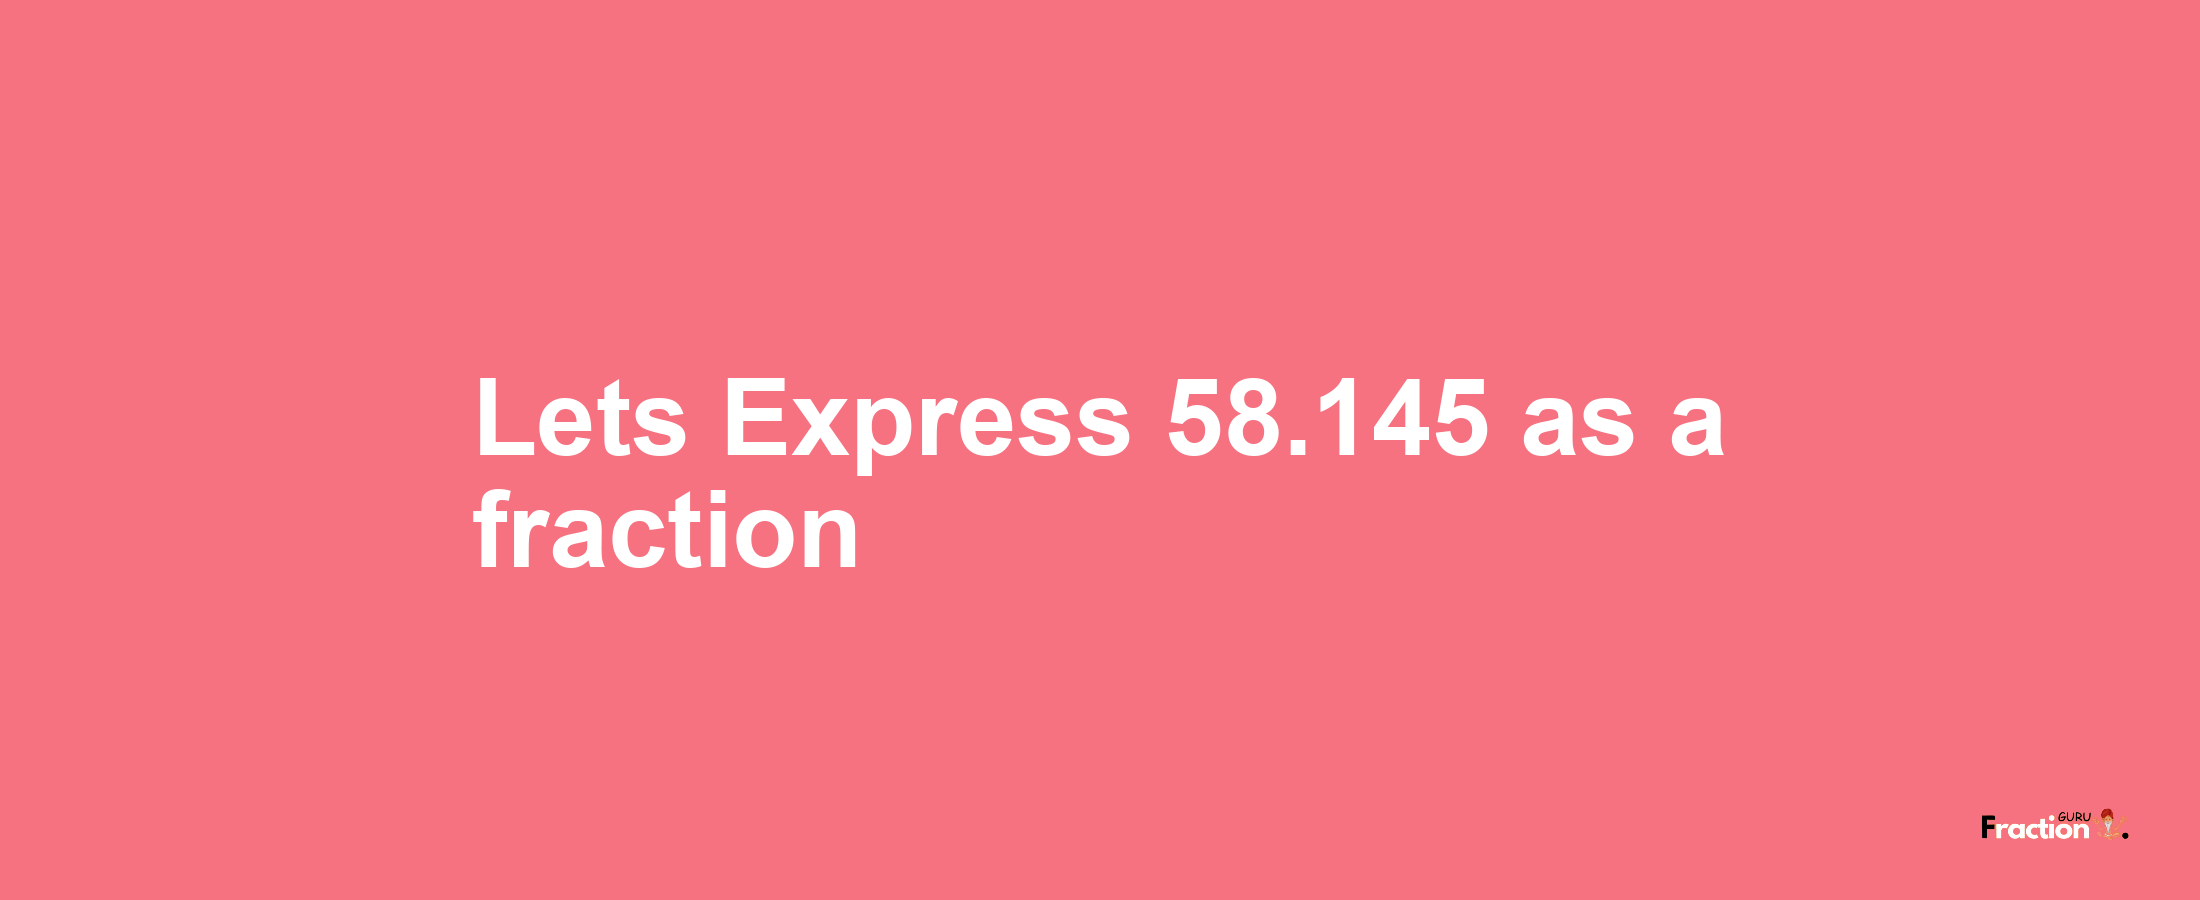 Lets Express 58.145 as afraction